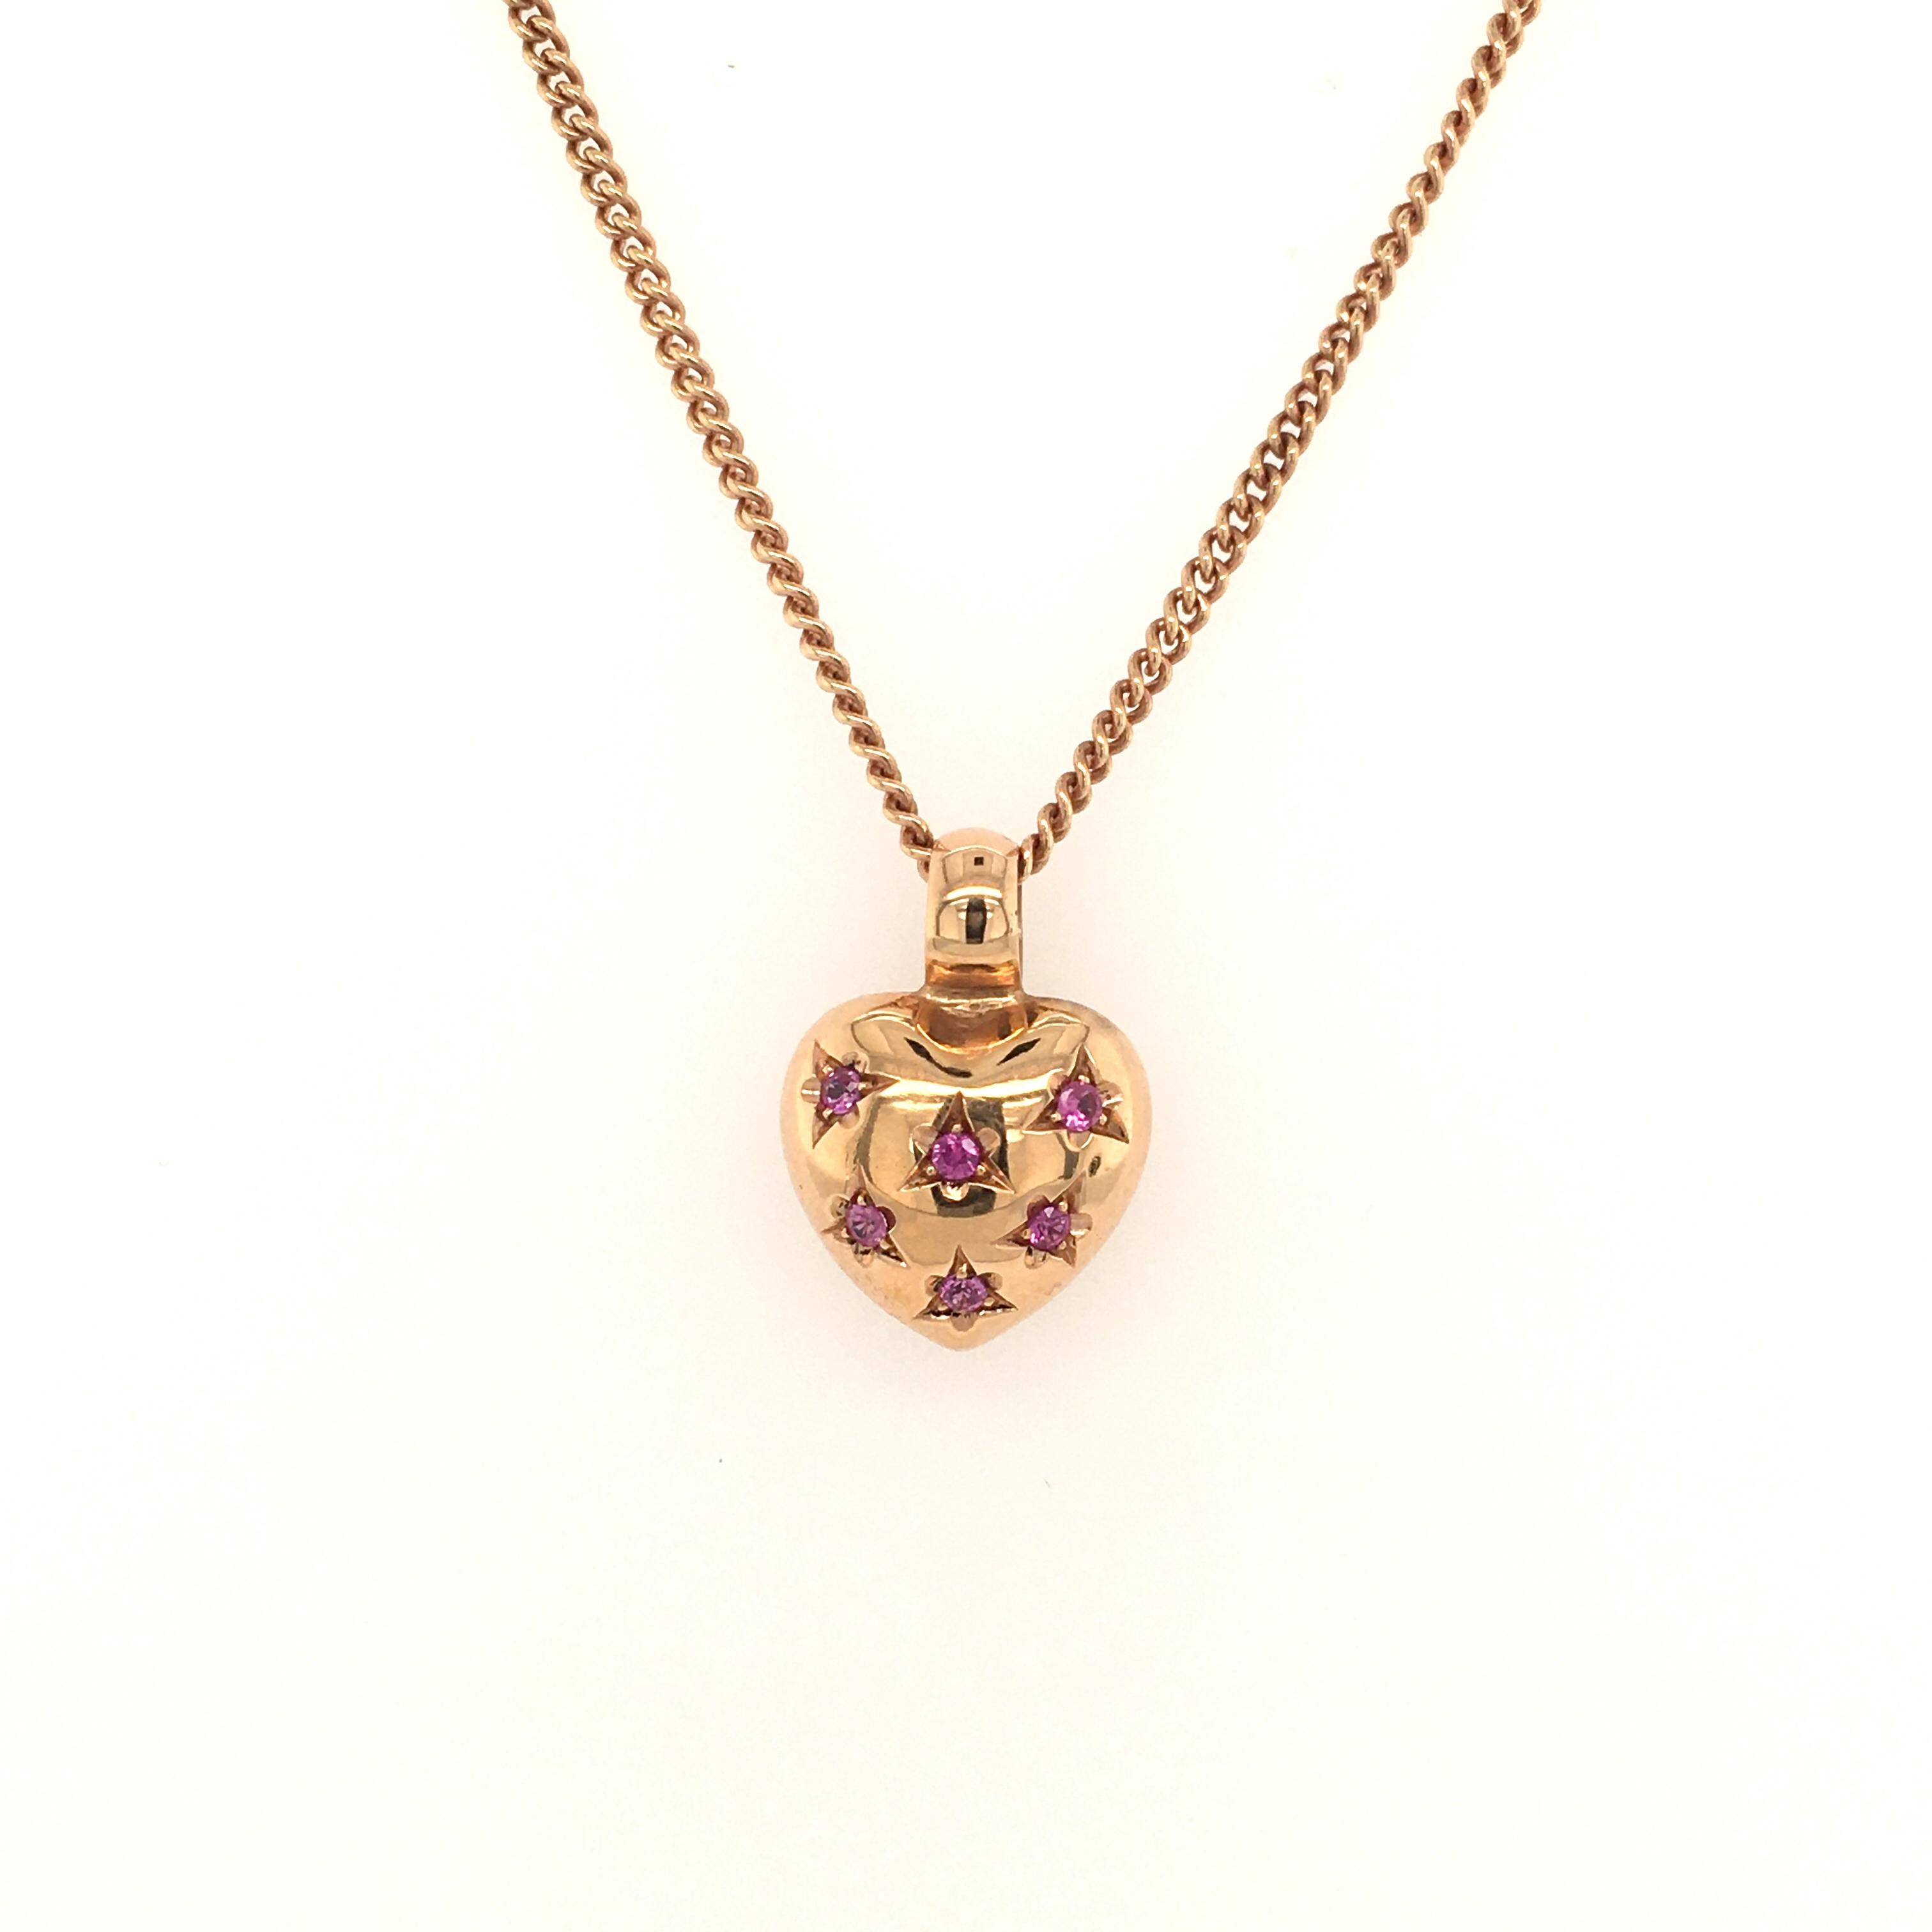 Lovely pendant in rose gold 750 set with 6 round cut pink sapphires totaling approx. 0.18 ct.

Please, ask for additional pictures if you are interested in this item.

Length: 44 cm / 17.32
Weight: 12.78 grams
Maker's mark: present
Assay mark: 750